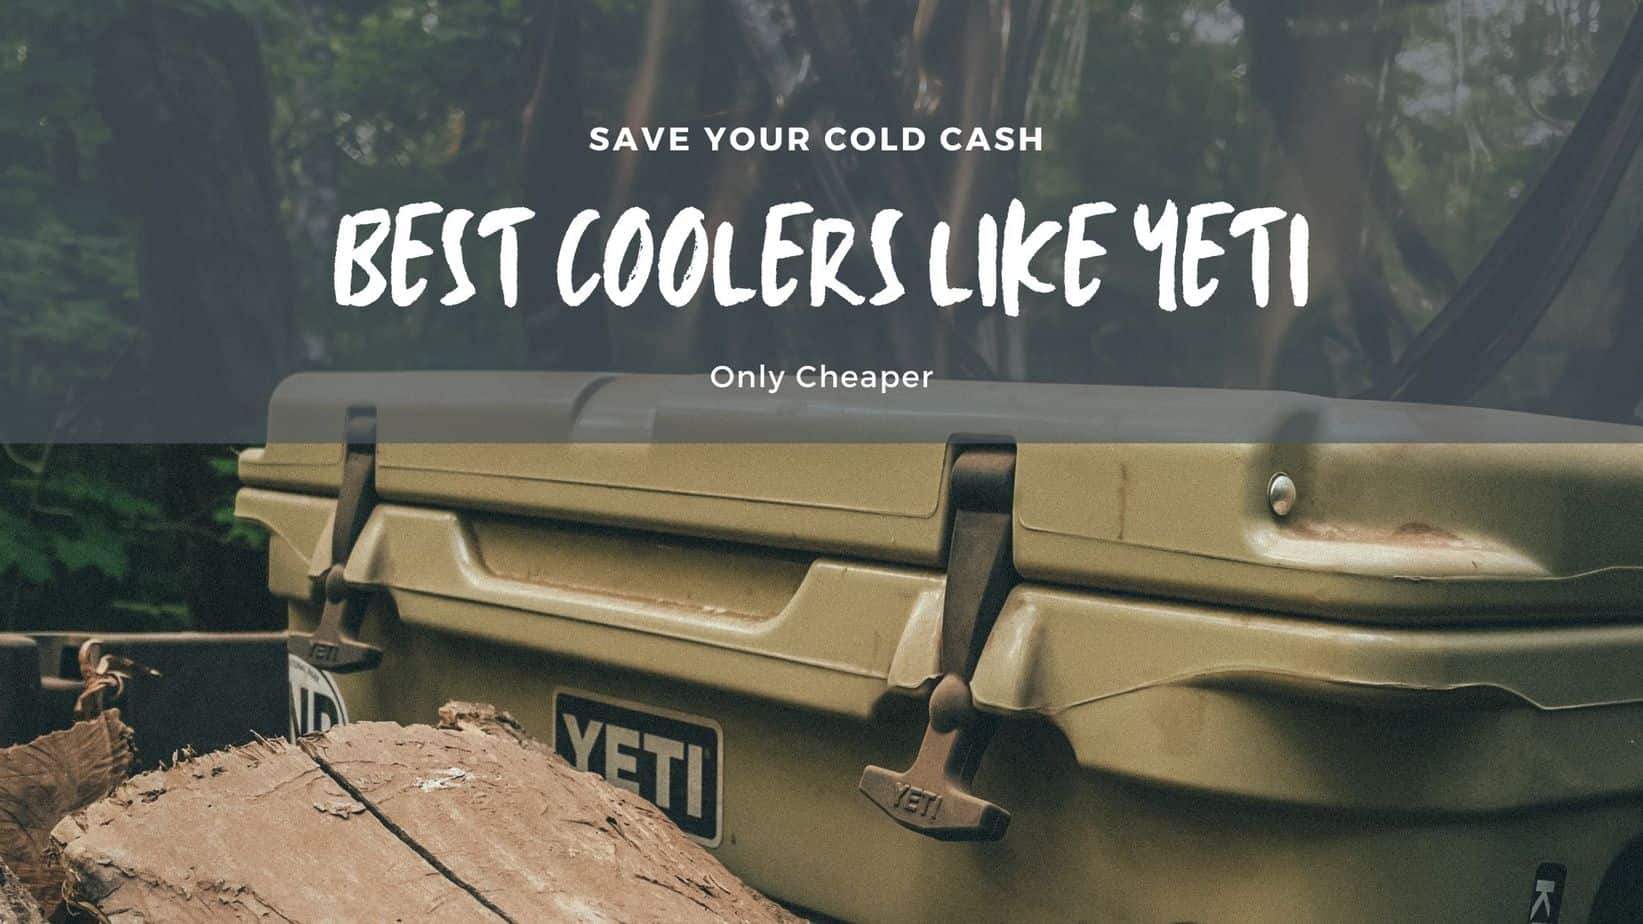 Best coolers like Yeti compares other rugged coolers to the king of camping coolers